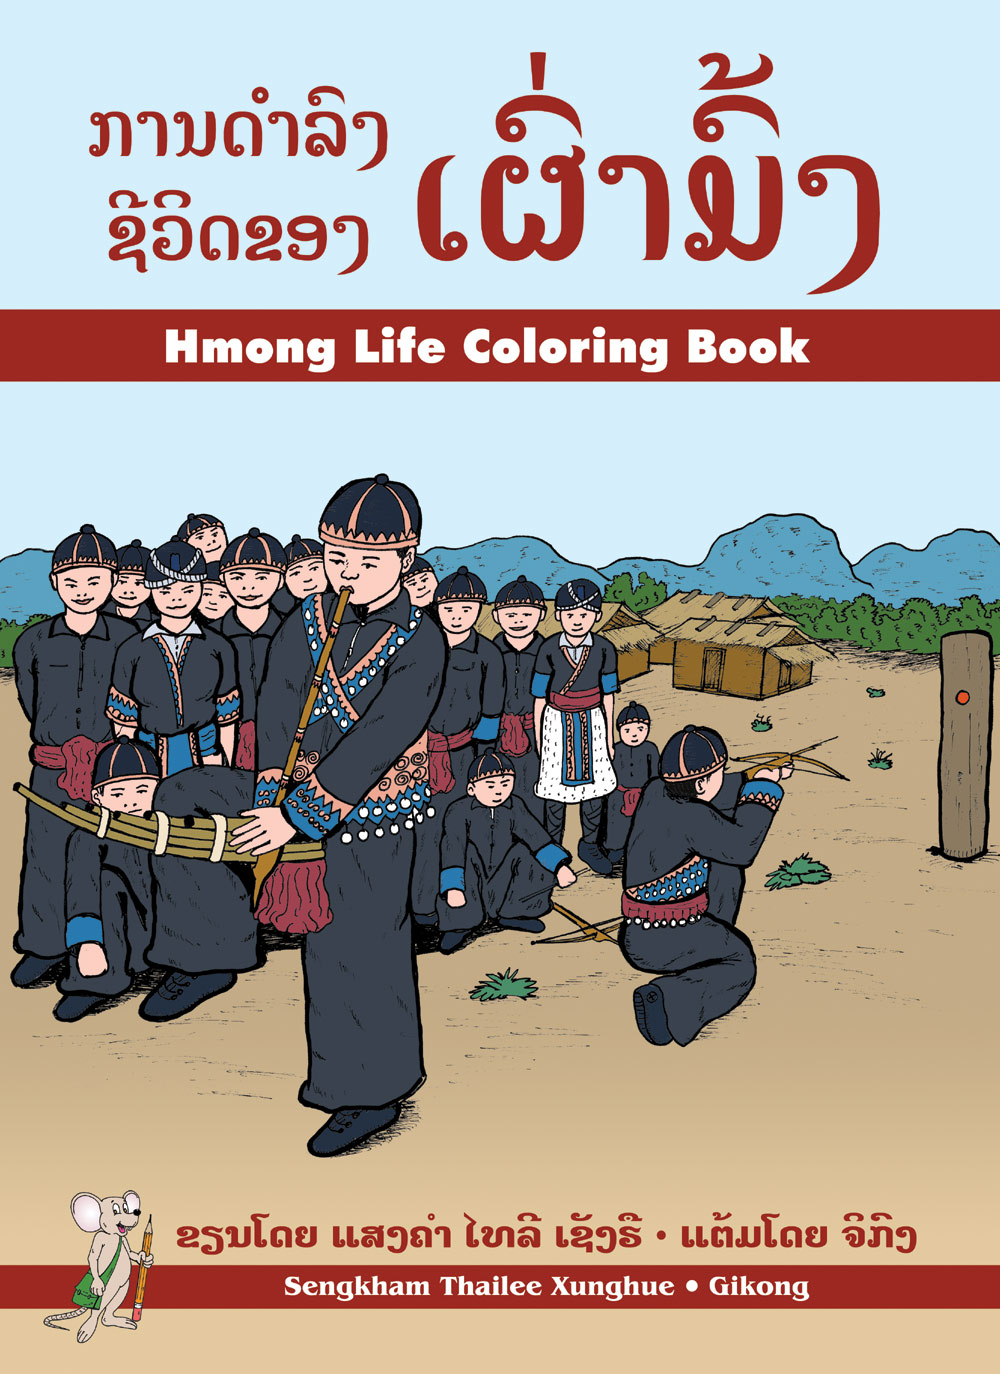 Hmong Life Coloring Book large book cover, published in Lao and English